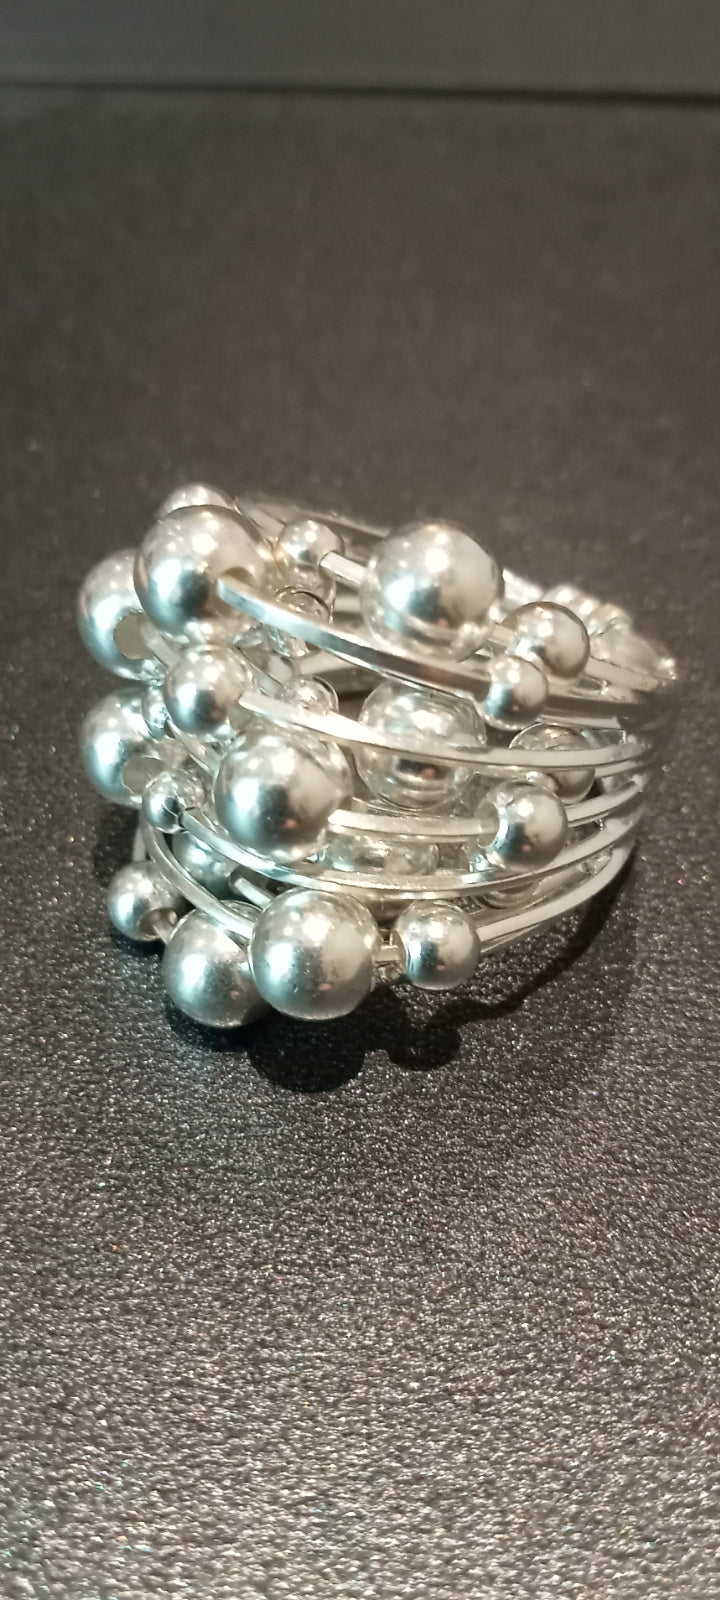 Moving Big Ball Cluster Ring